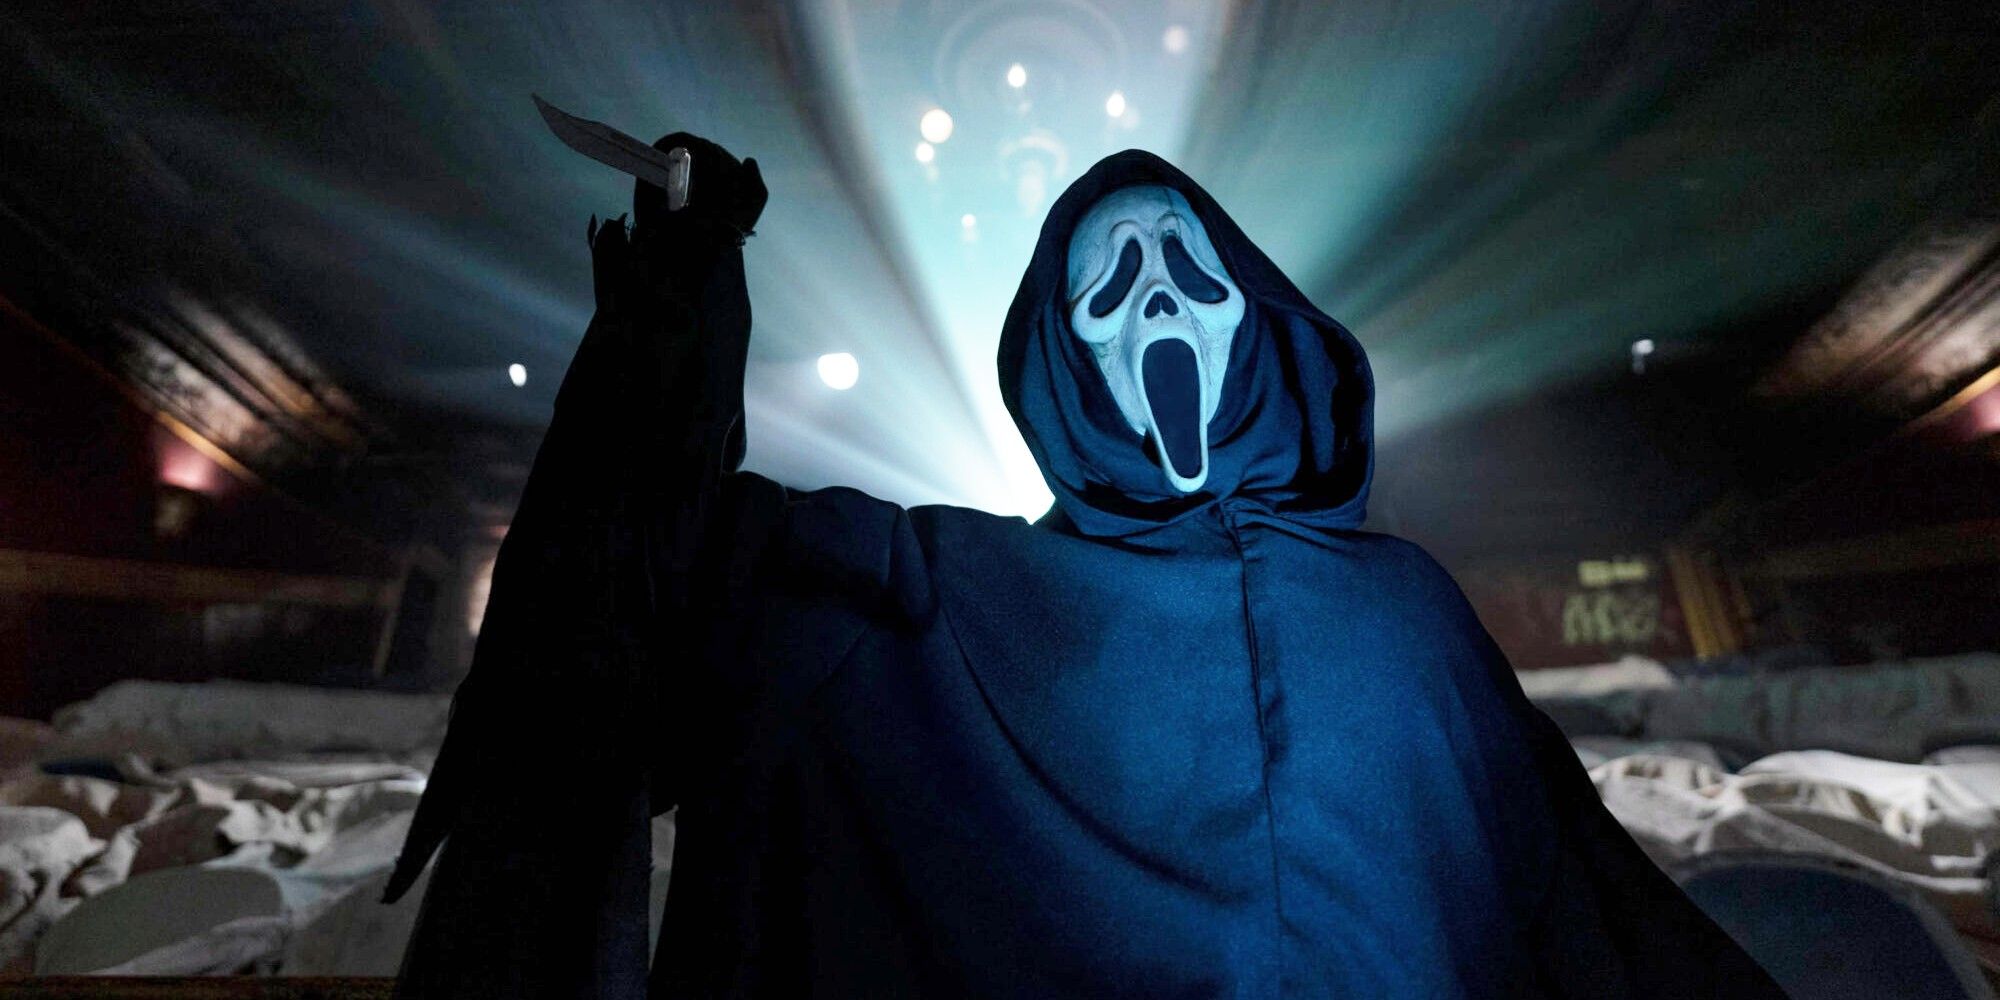 Ghostface with his knife aimed high in Scream 6 ending